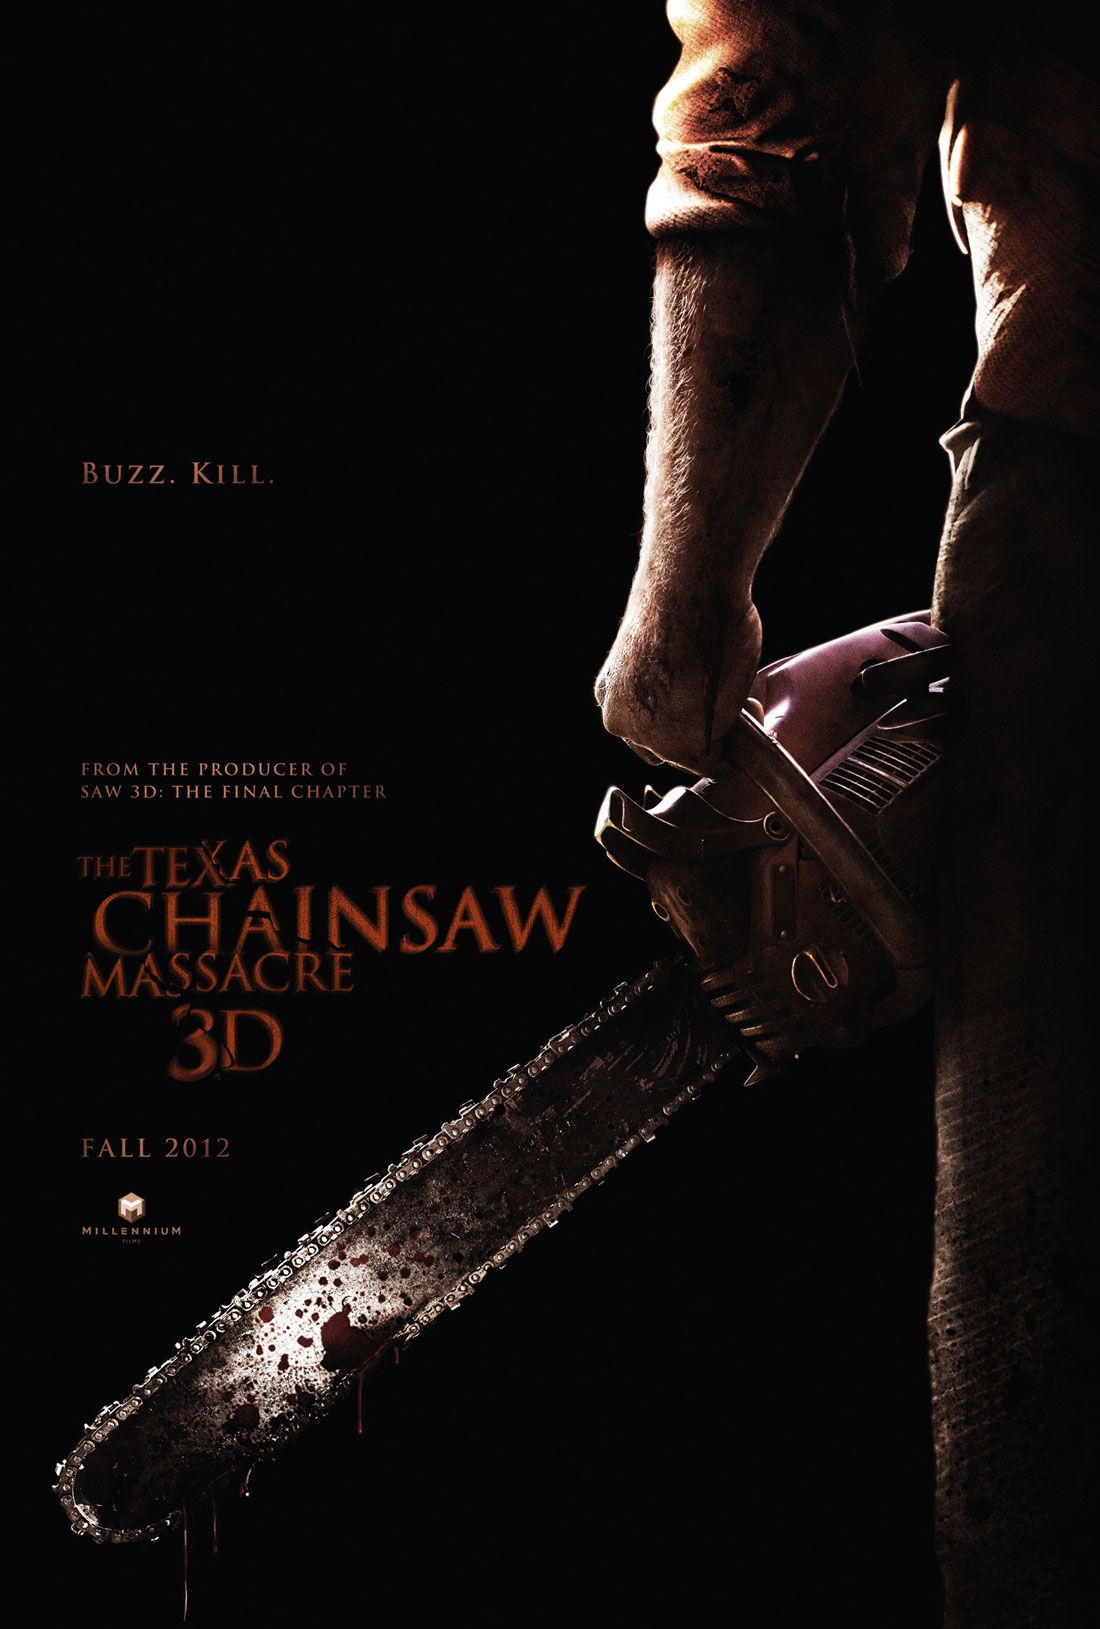 The Texas Chainsaw Masssacre 3D Poster